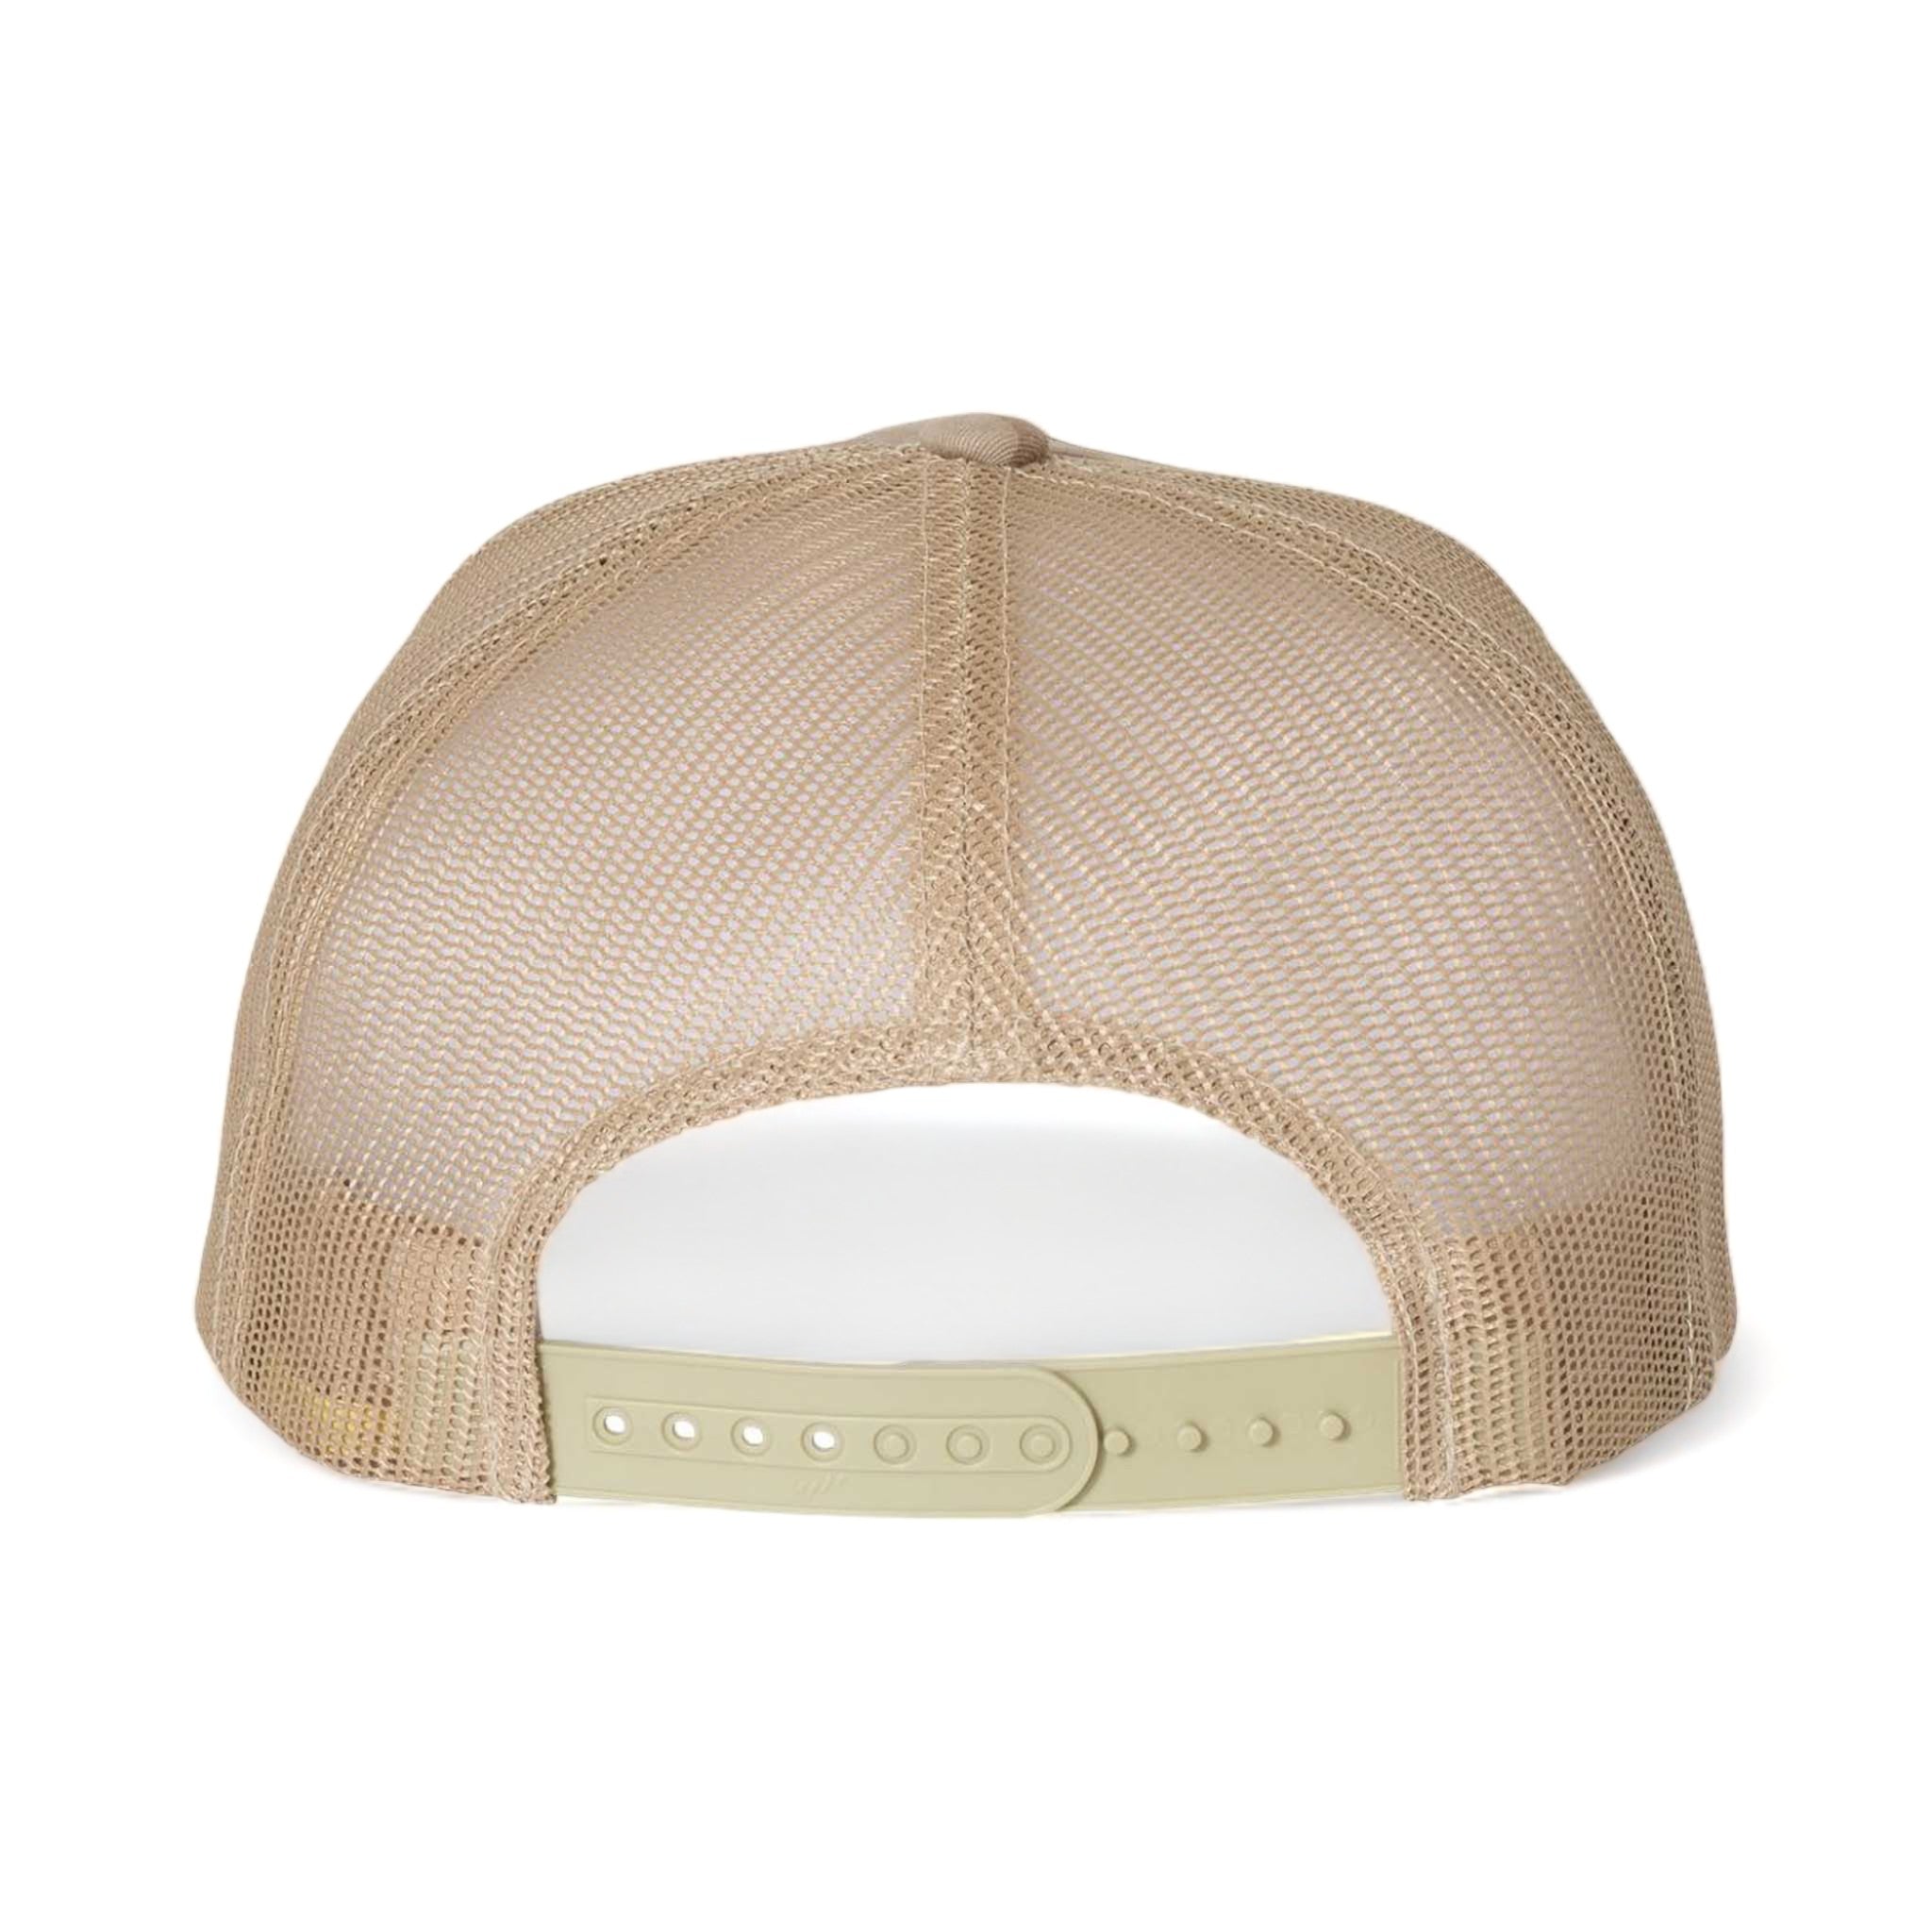 Back view of YP Classics 6006 custom hat in multicam arid and tan